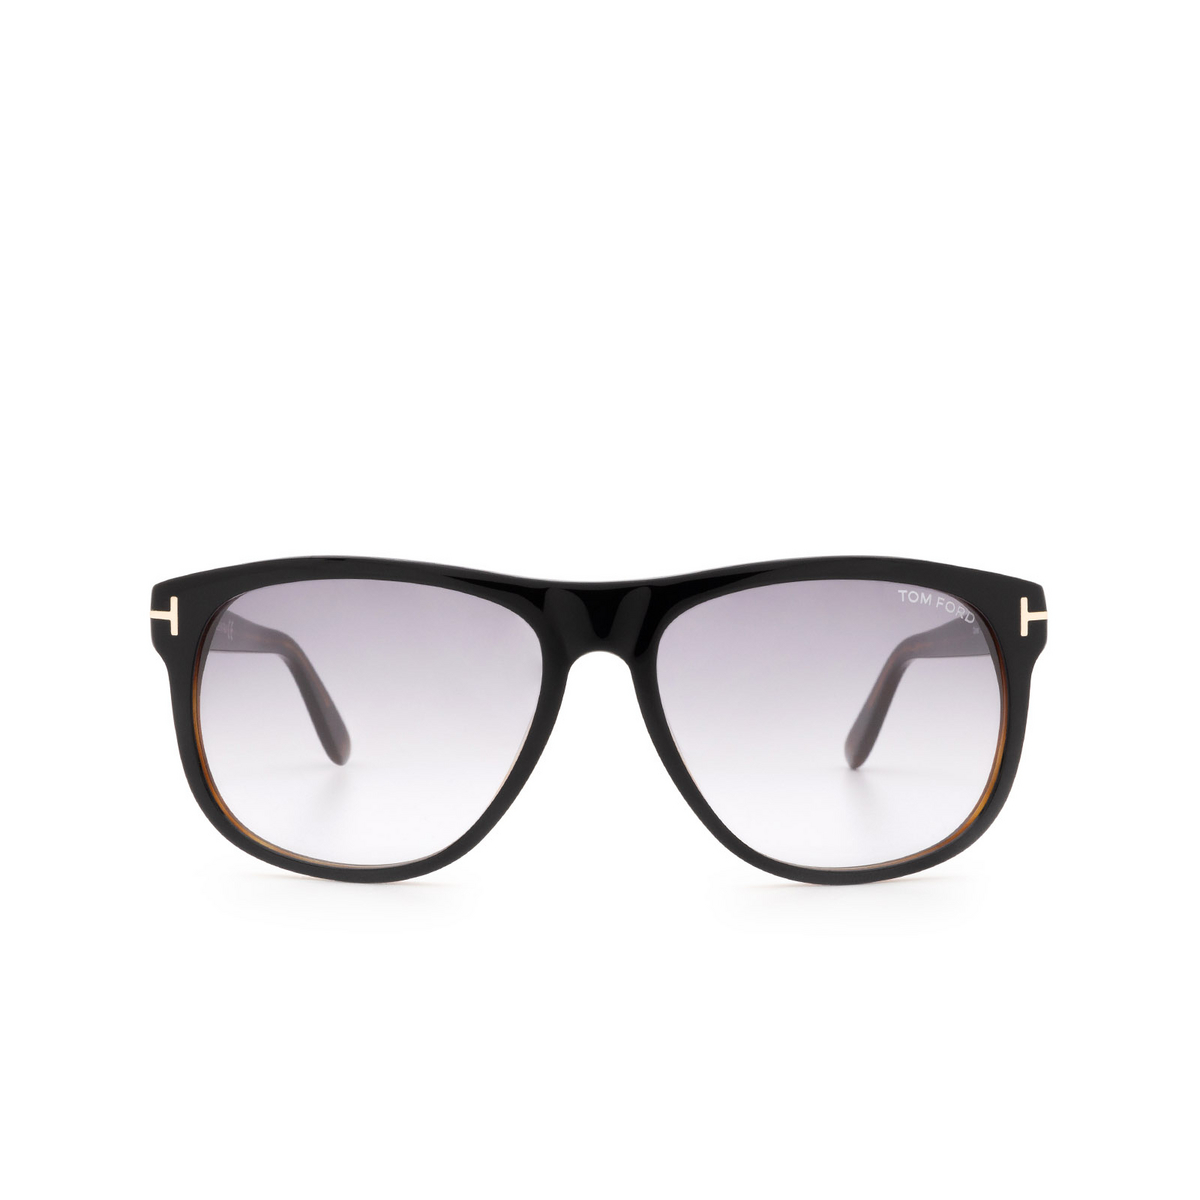 Tom Ford OLIVIER Sunglasses 05B Black - front view